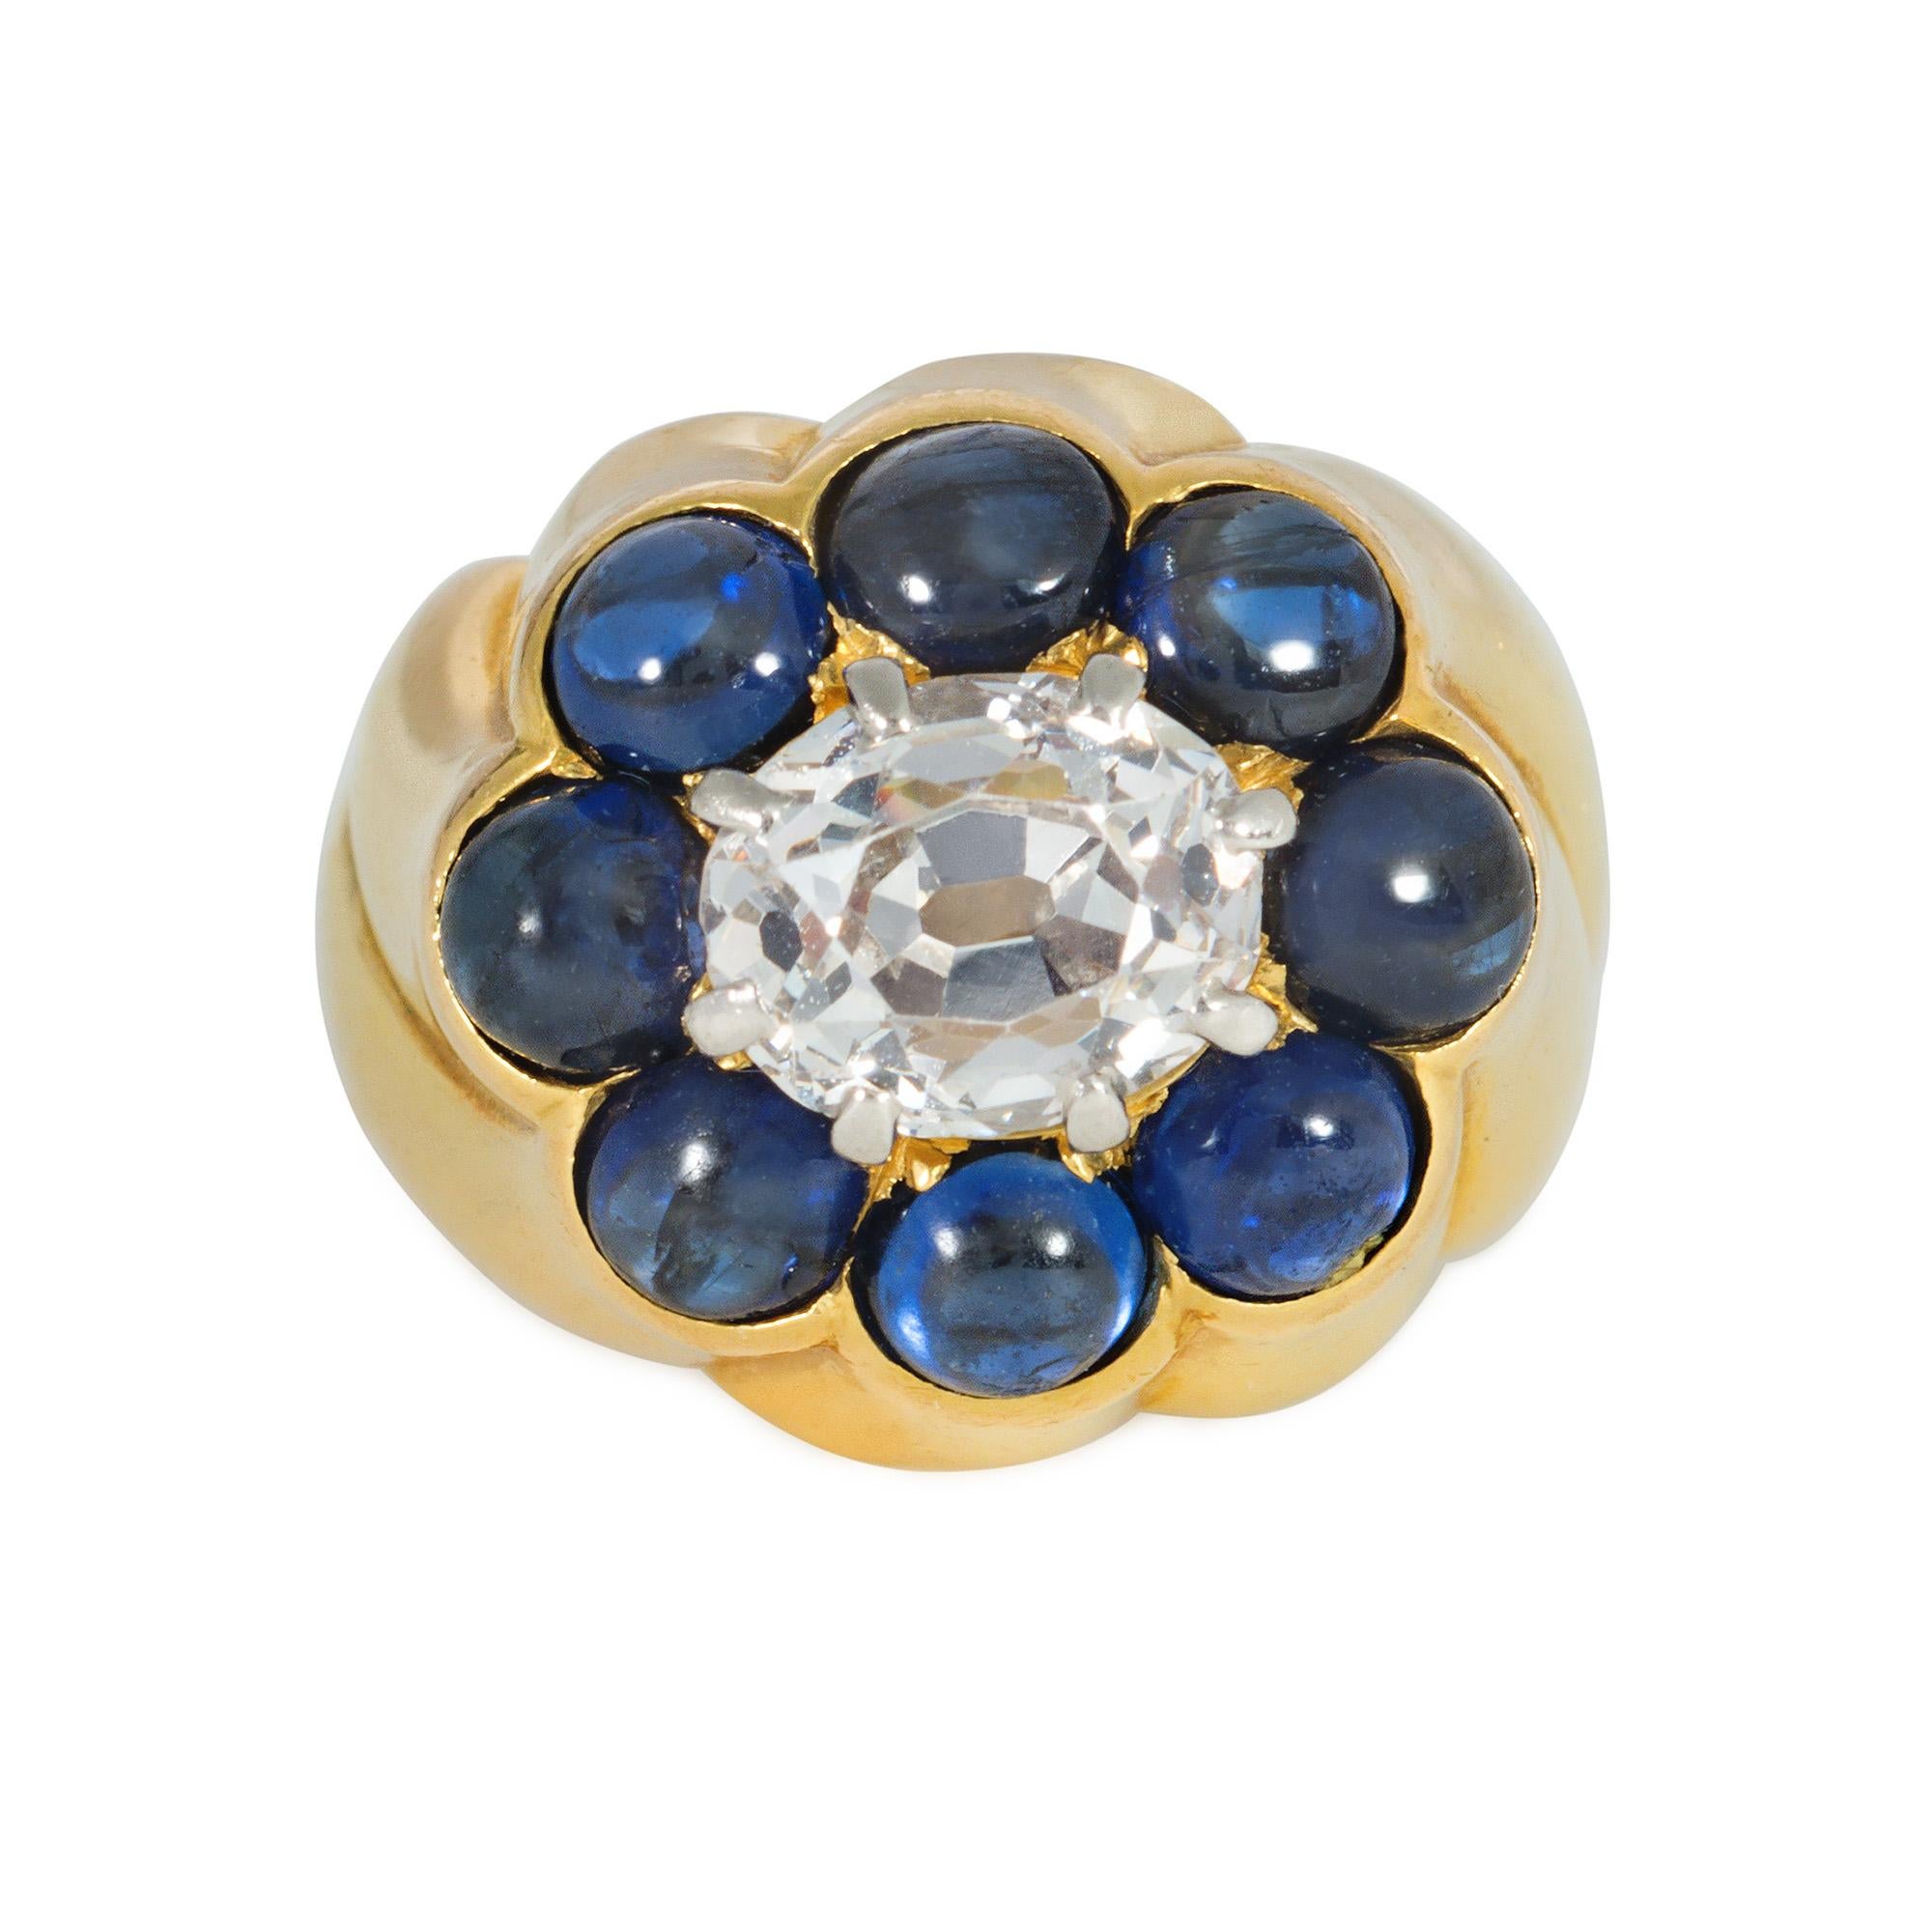 A Retro gold, sapphire, and diamond ring, the mount of fluted design and centering on an inset stylized florette of cabochon sapphires surrounding a diamond, in 18k. Cartier, Paris. Monture #. Atw diamond 1.61 cts. For a similar item, see Amazing